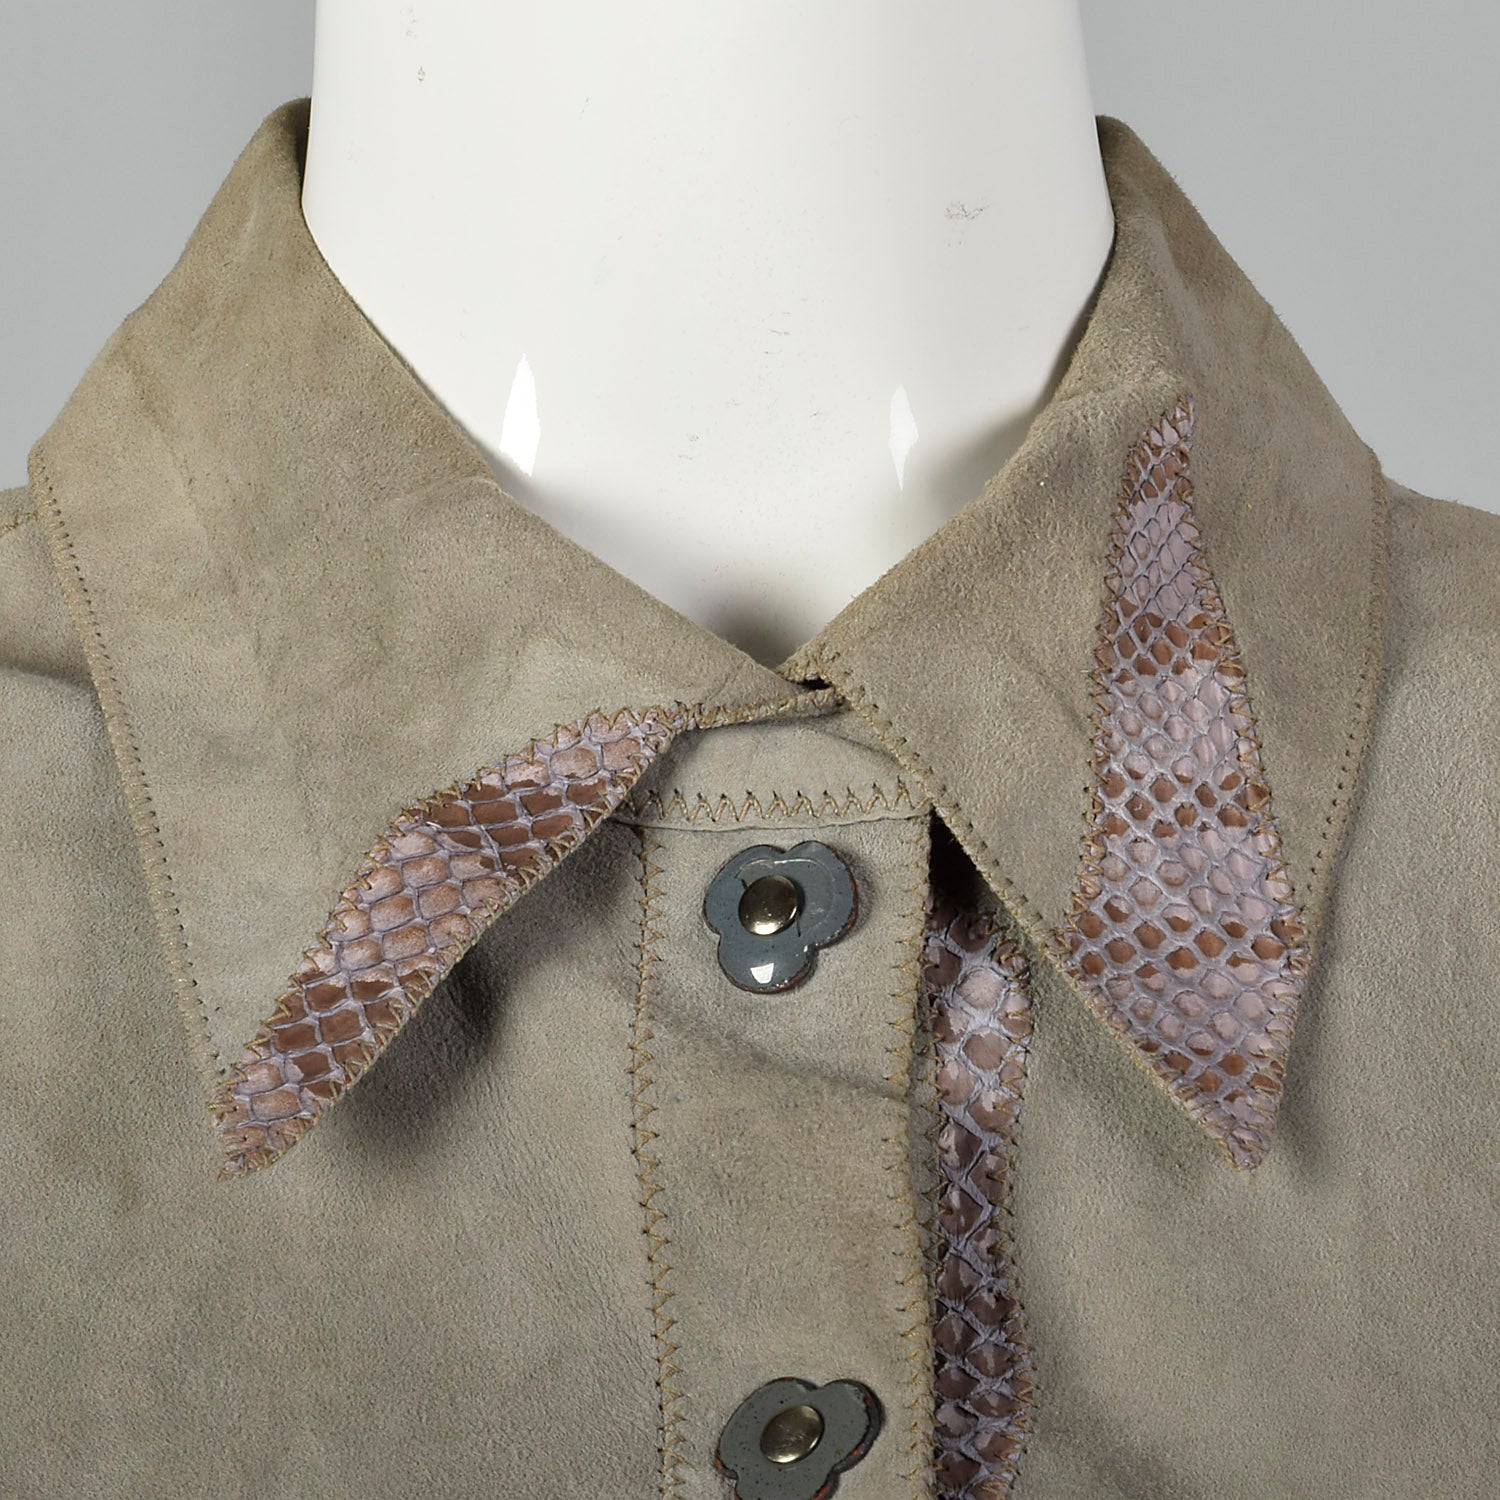 Small 1970s Suede Shirt with Lavender Snakeskin